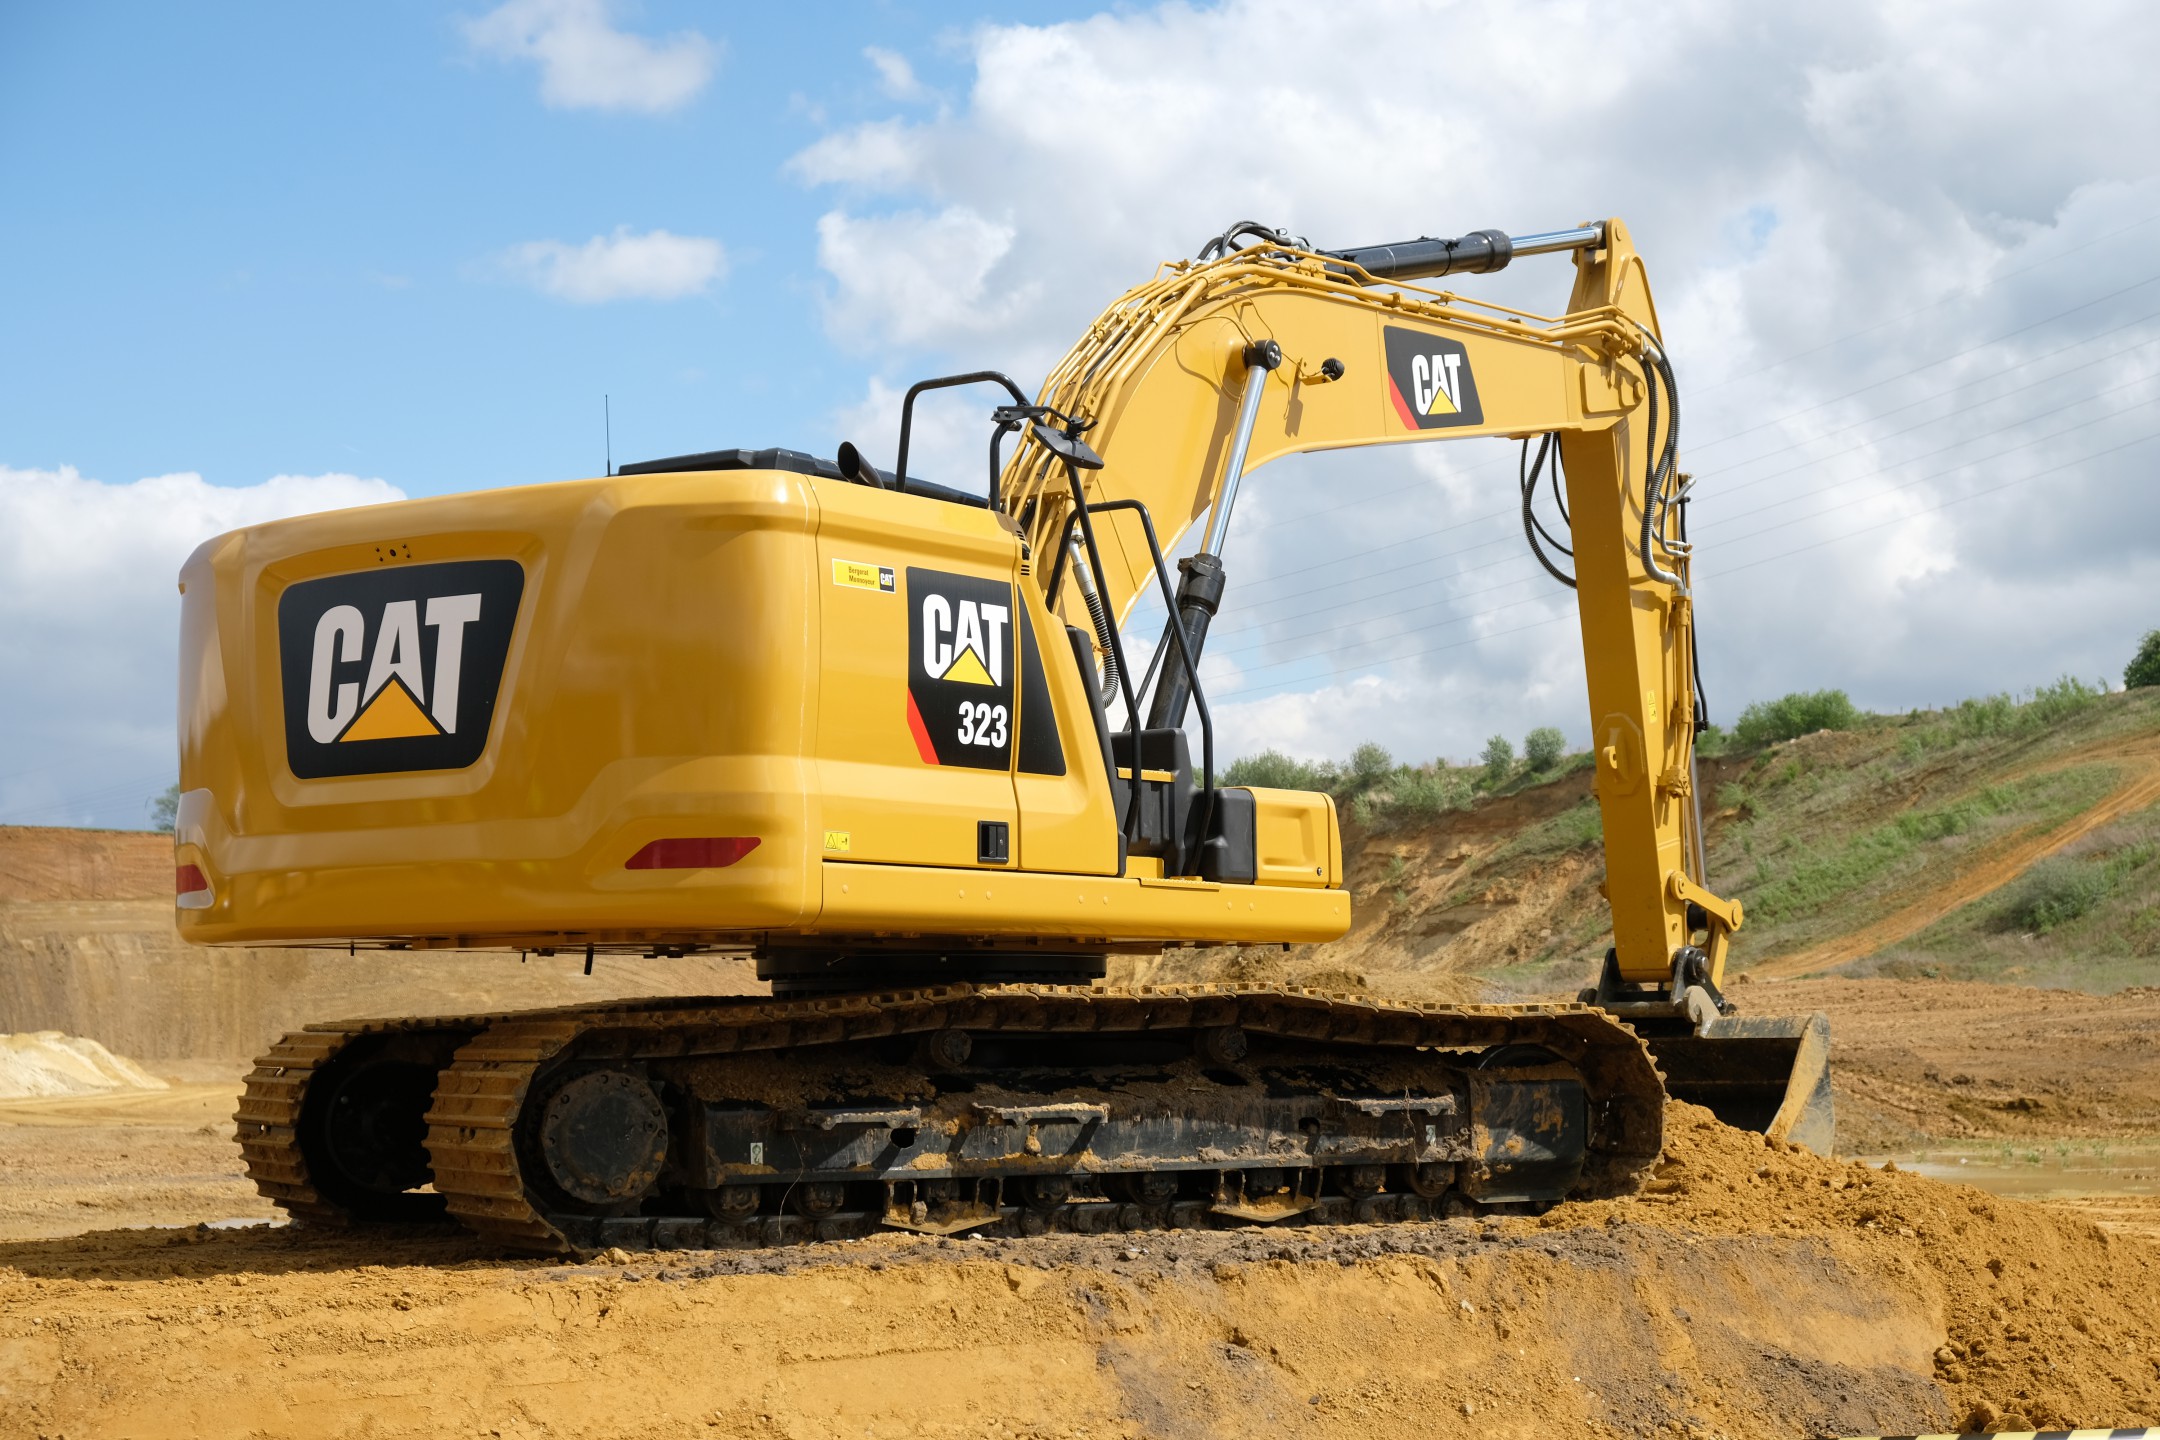 Caterpillar Moving Its Headquarters to Texas from Illinois, Chicago News